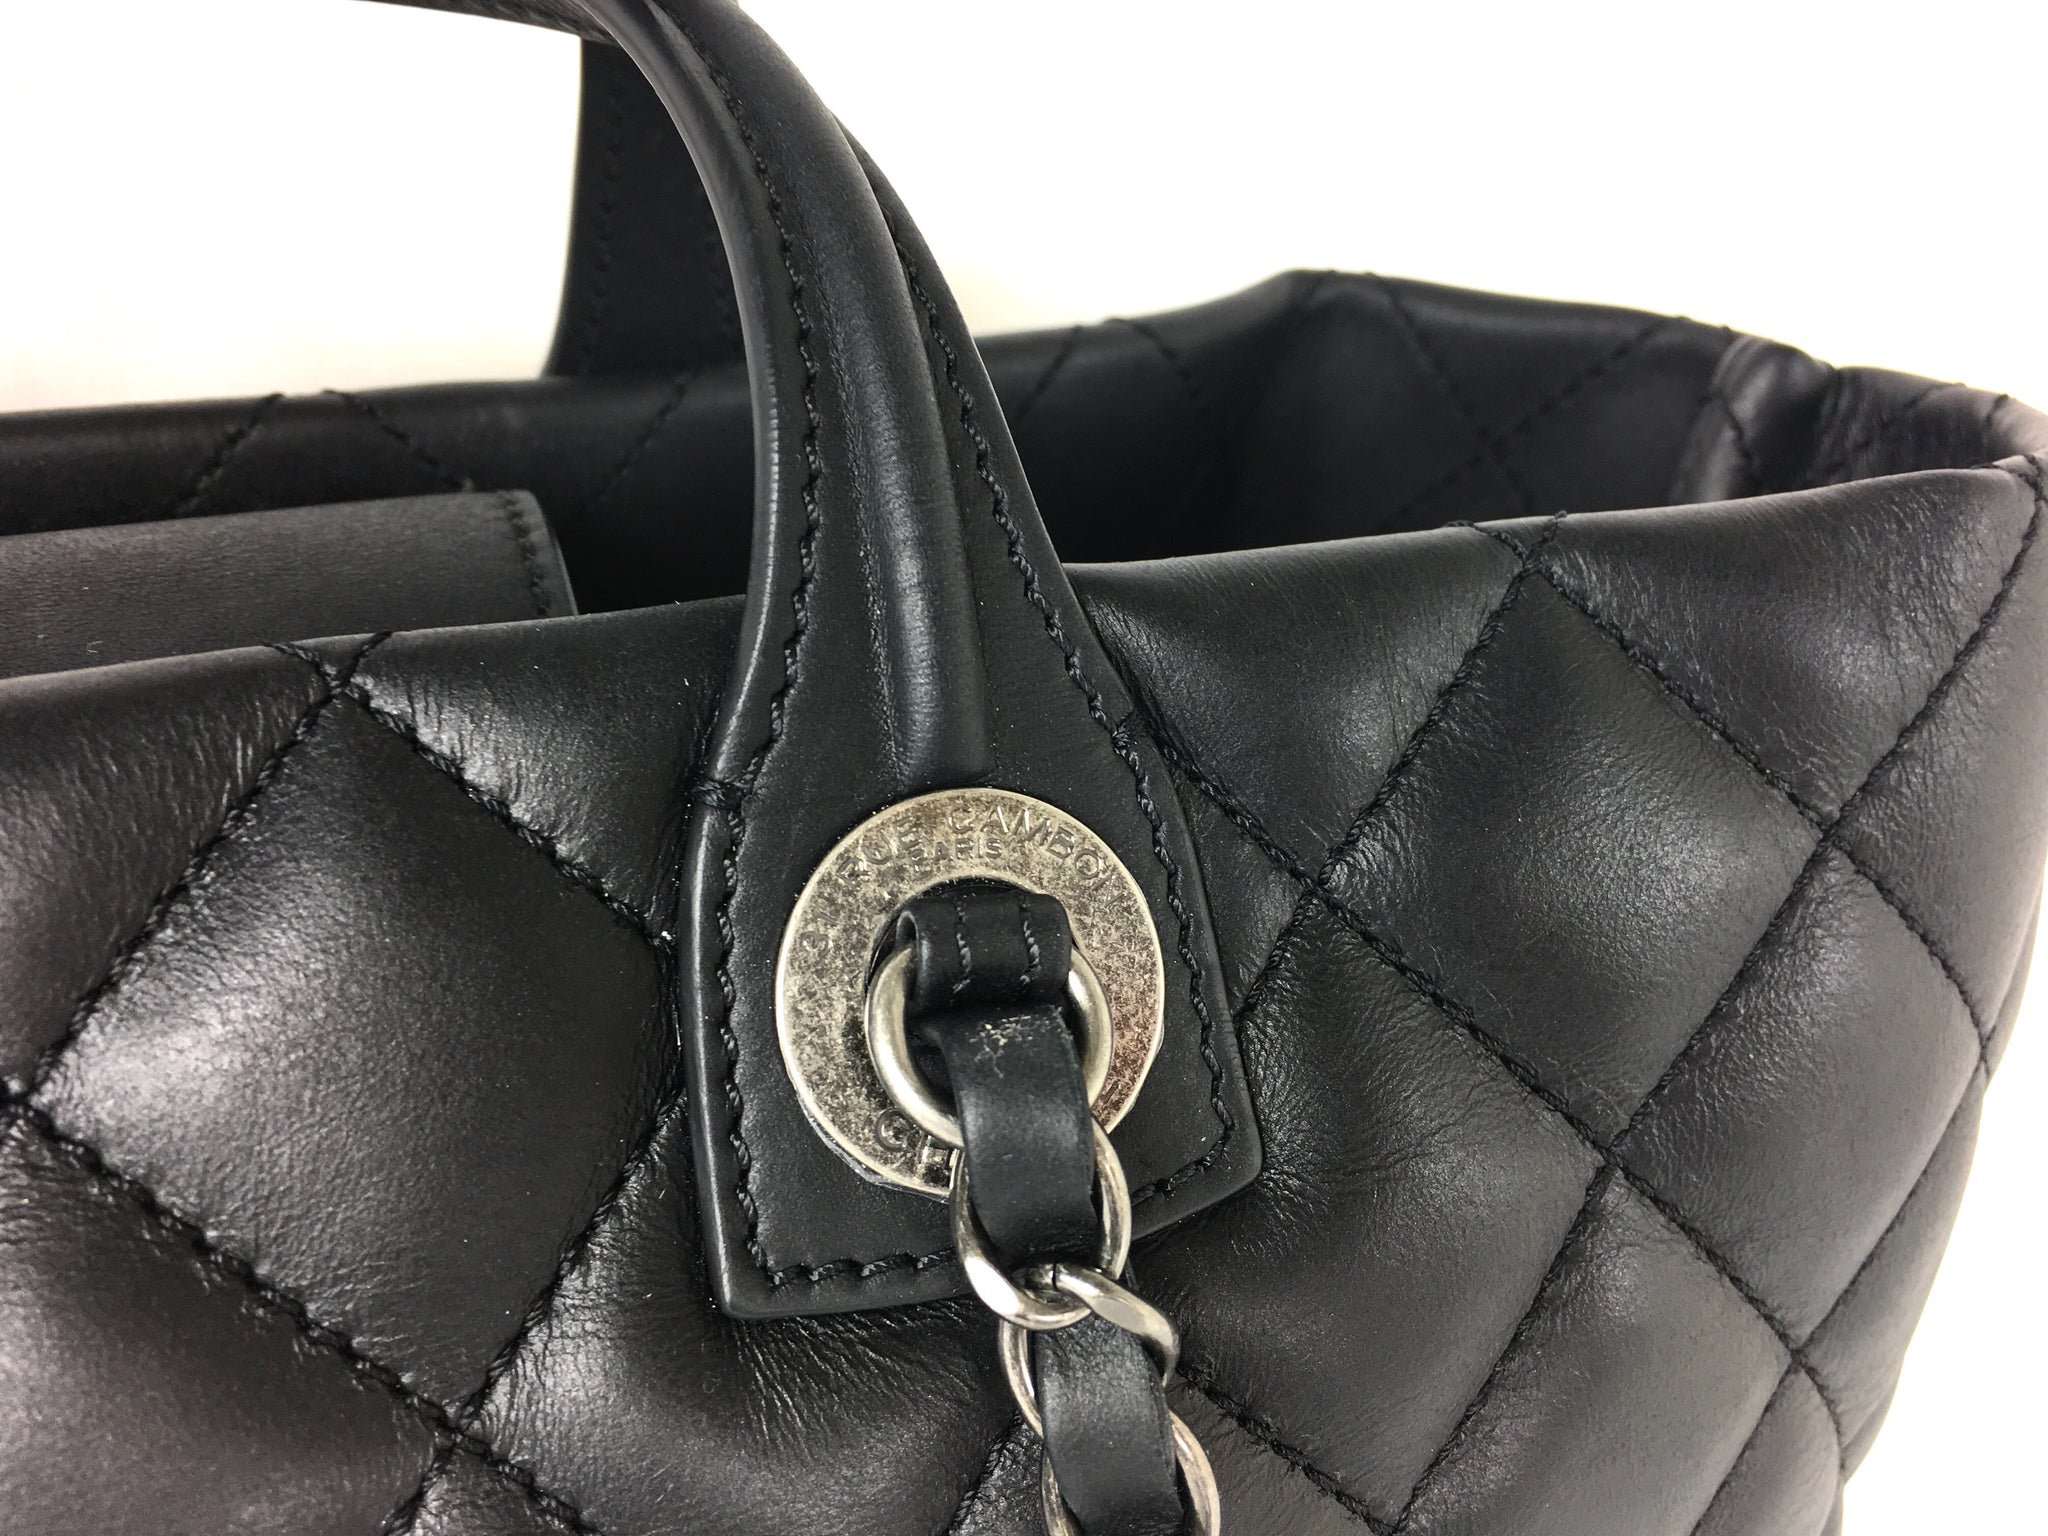 CHANEL Black Leather Quilted Charm Tote